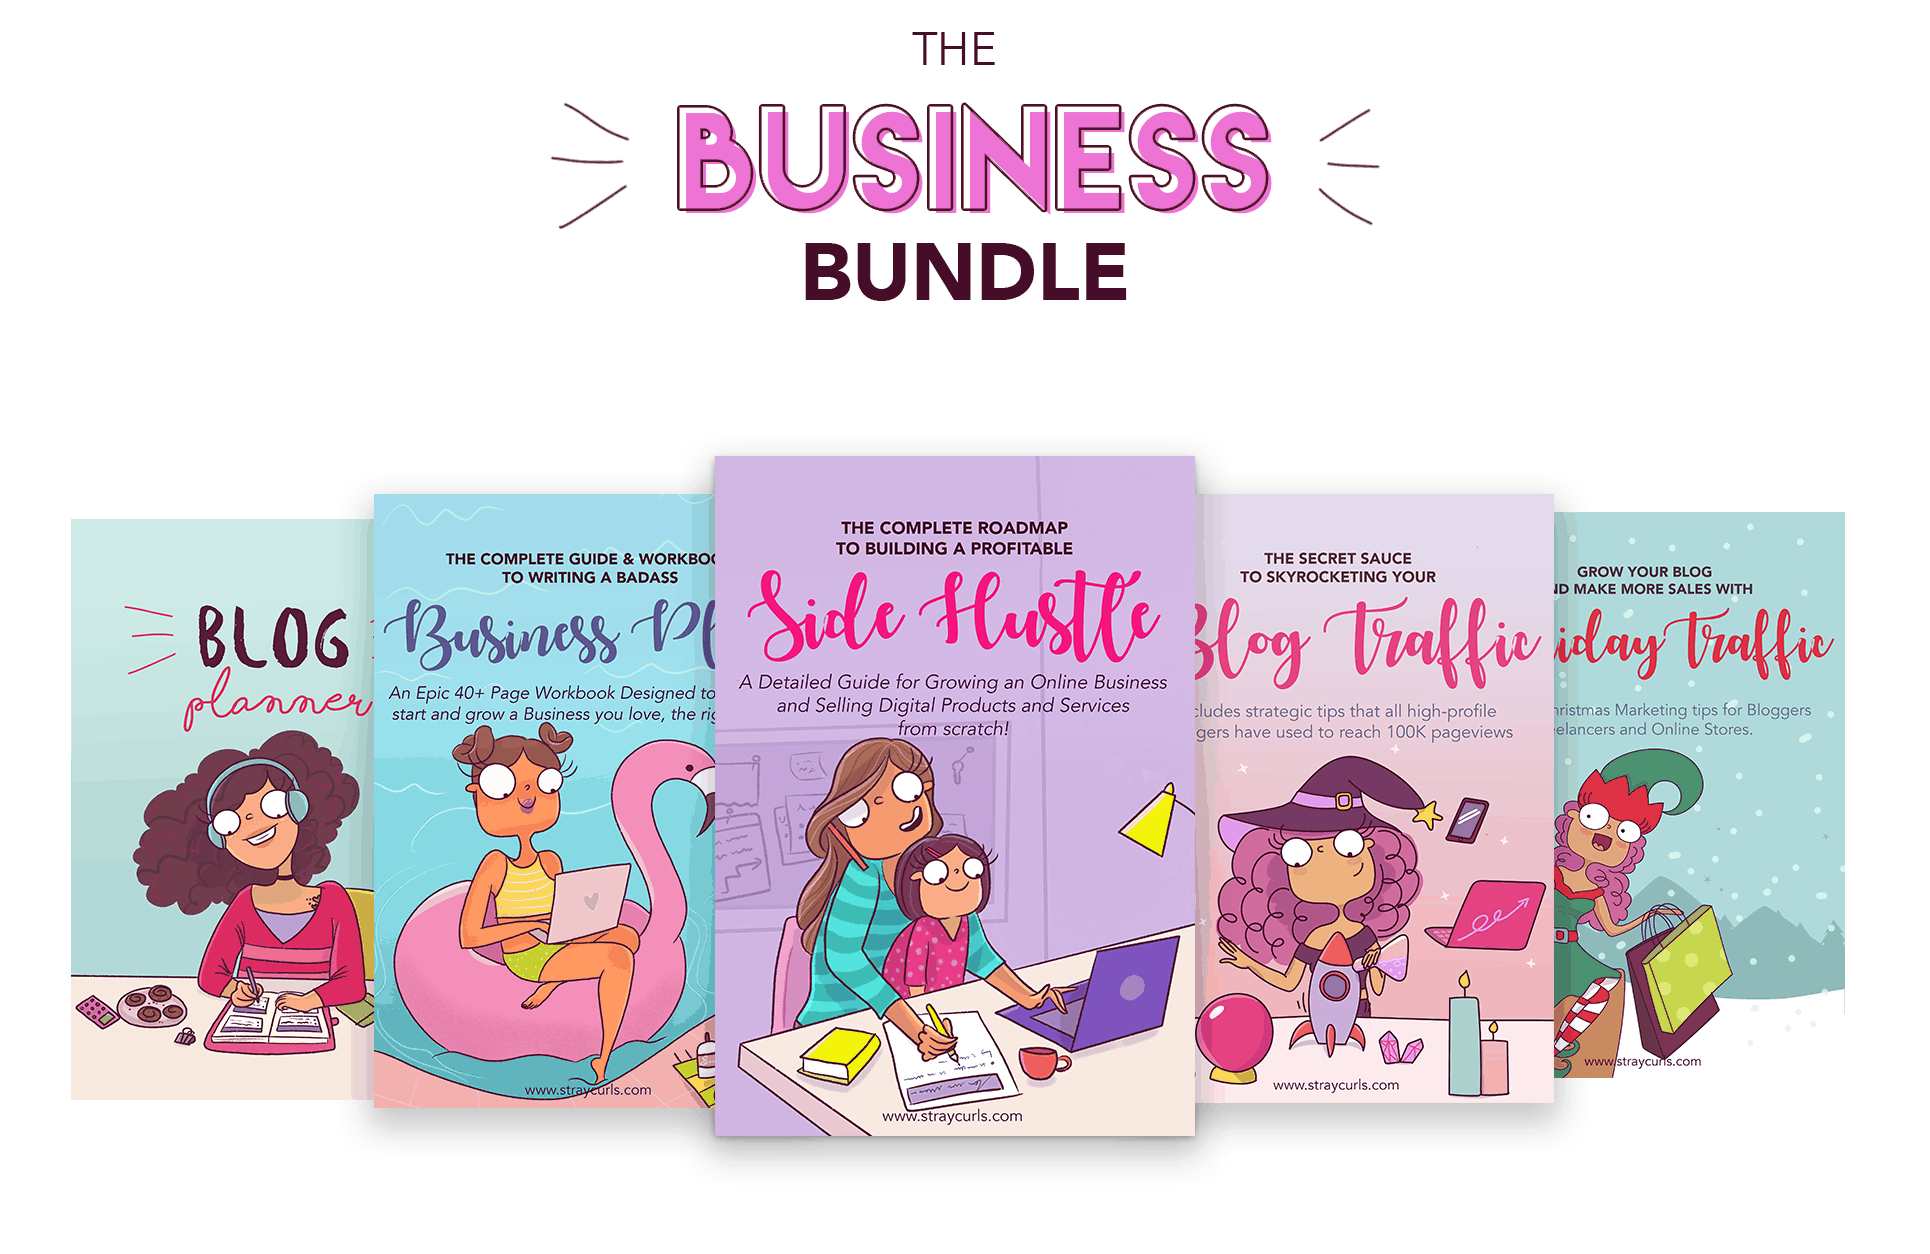 Get the entire Business Bundle which includes the Blog Planner, the Business Planner, the Side Hustle eBook, the Blog Traffic eBook and the Holiday Traffic eBook.